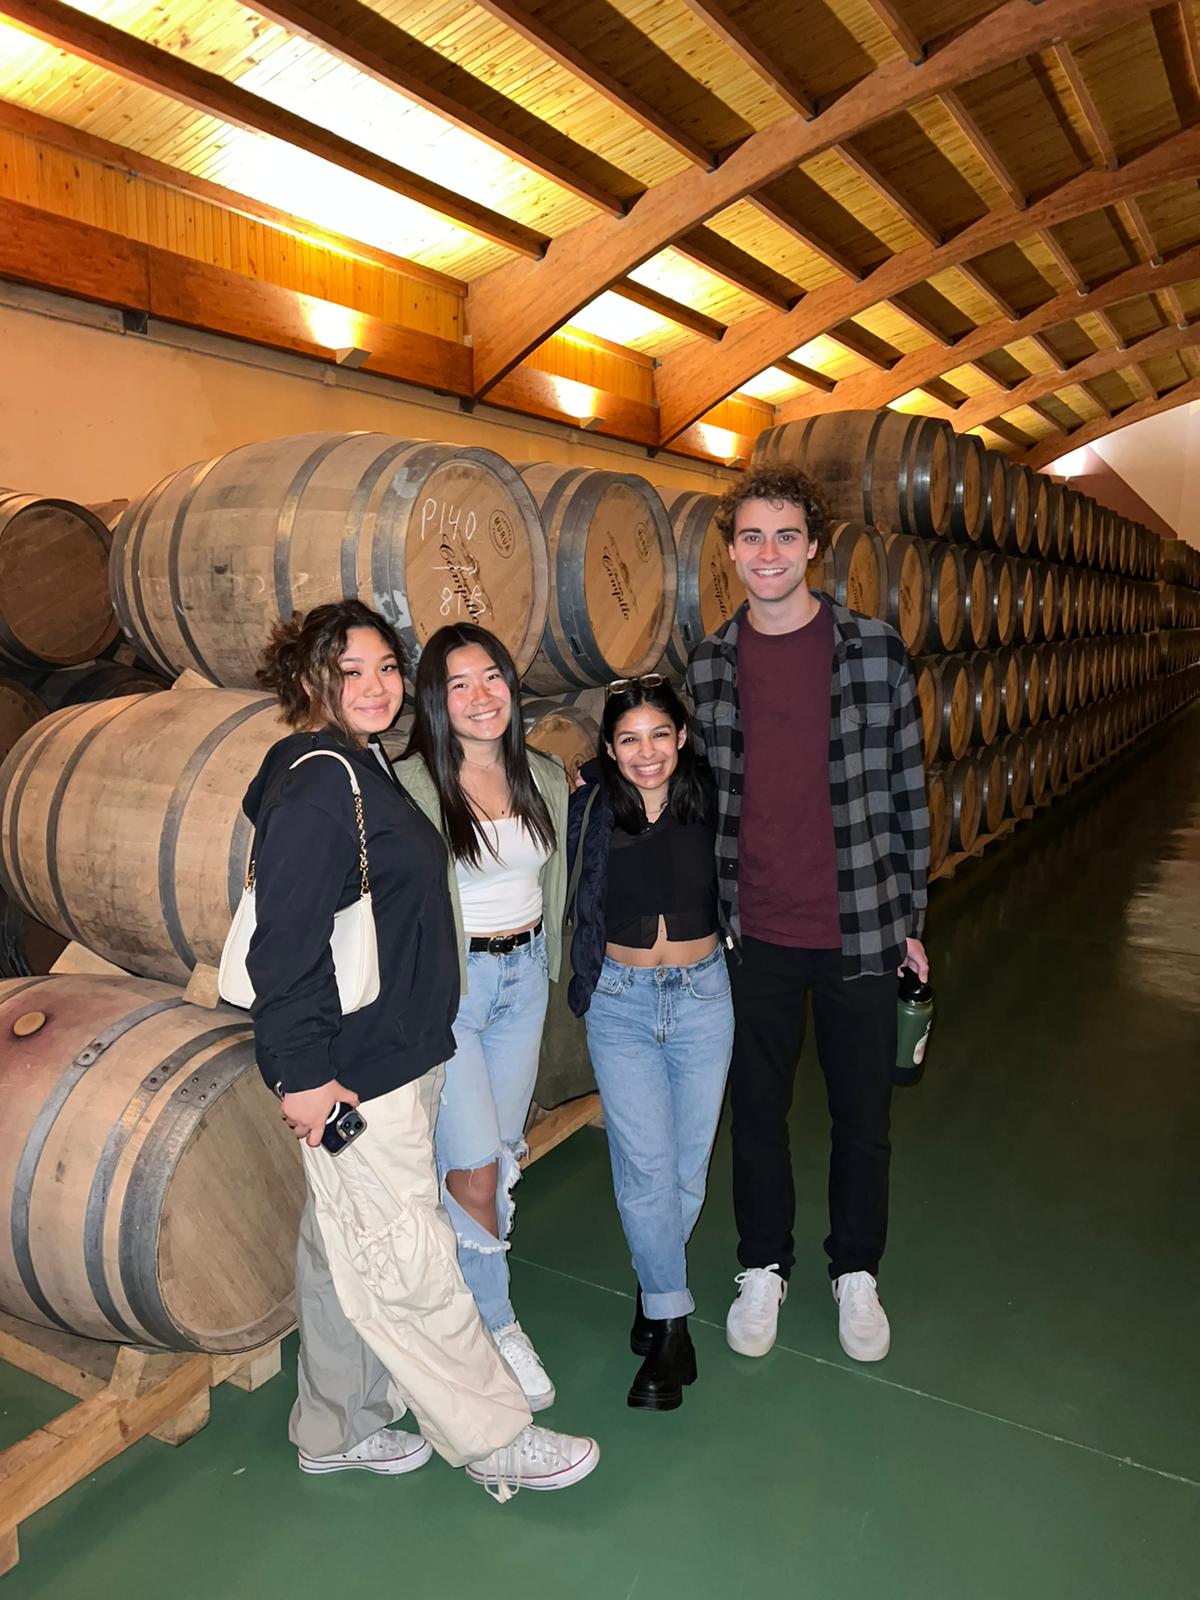 Students standing in front of wine barrels touring one of the many wineries in Laguardia, Spain.